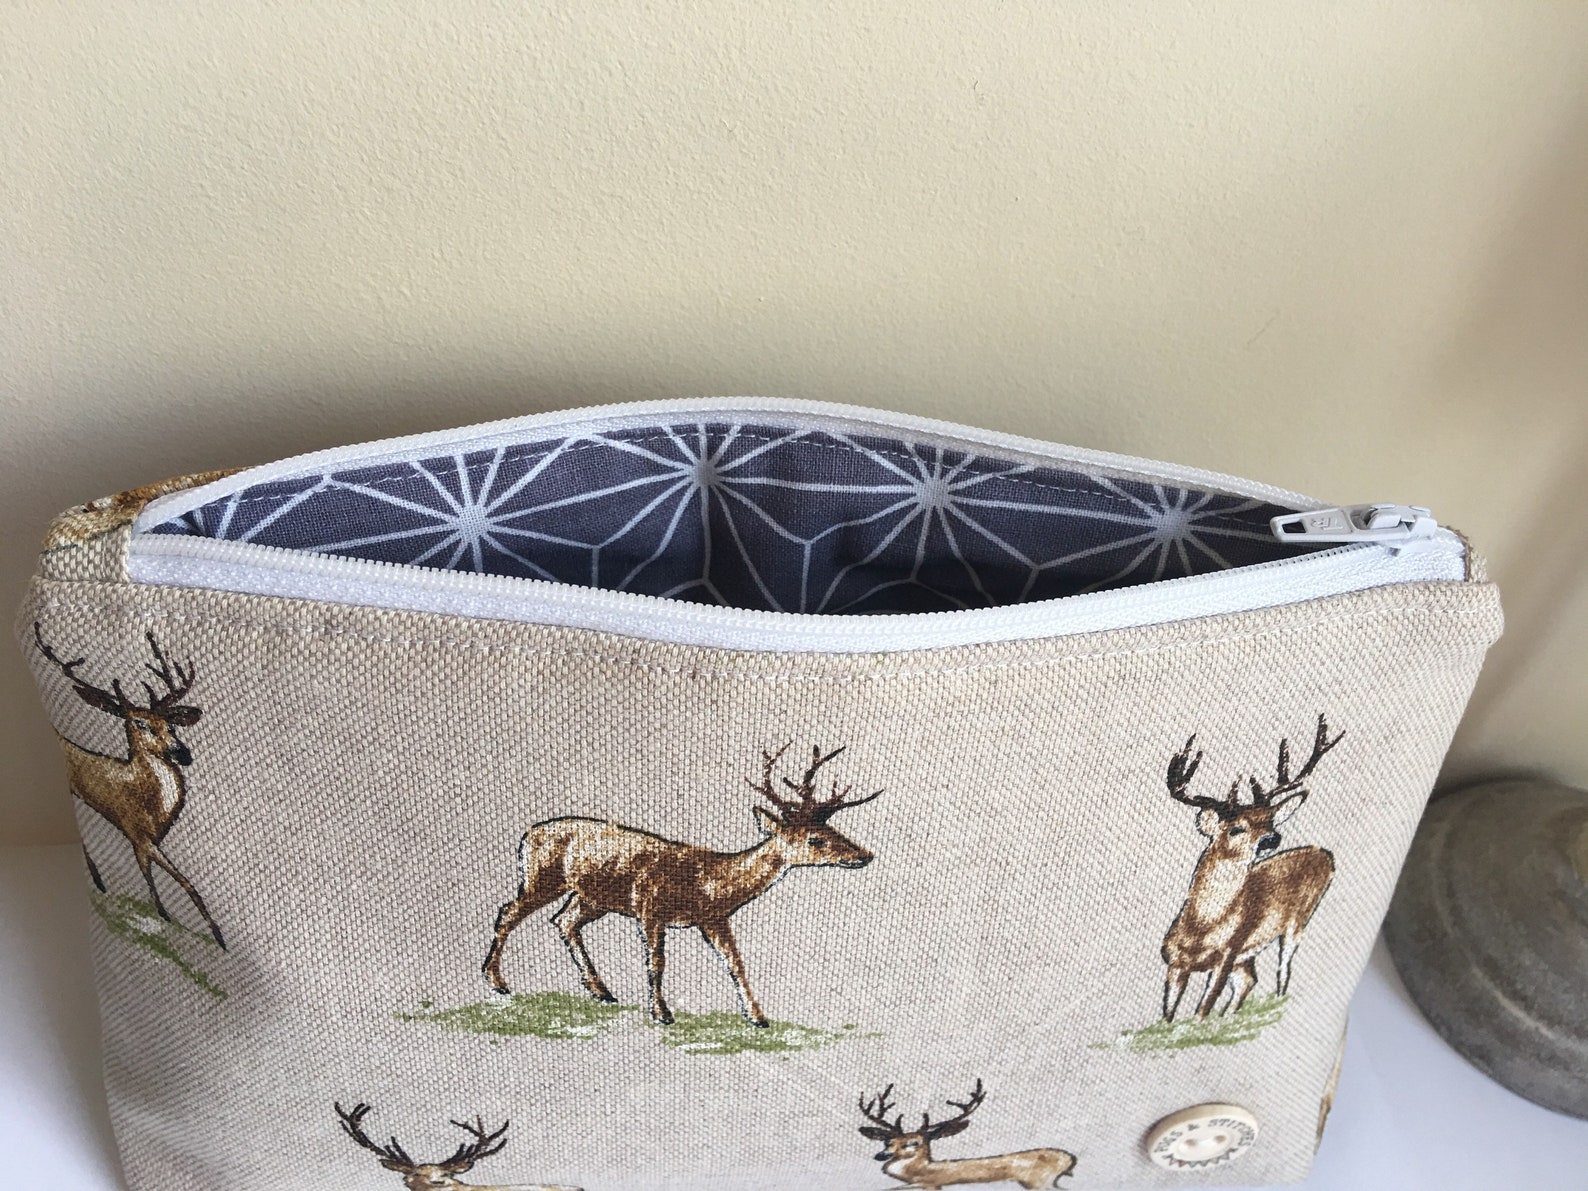 Stag Deer cosmetic bag / make-up / pencil case. Matching | Etsy